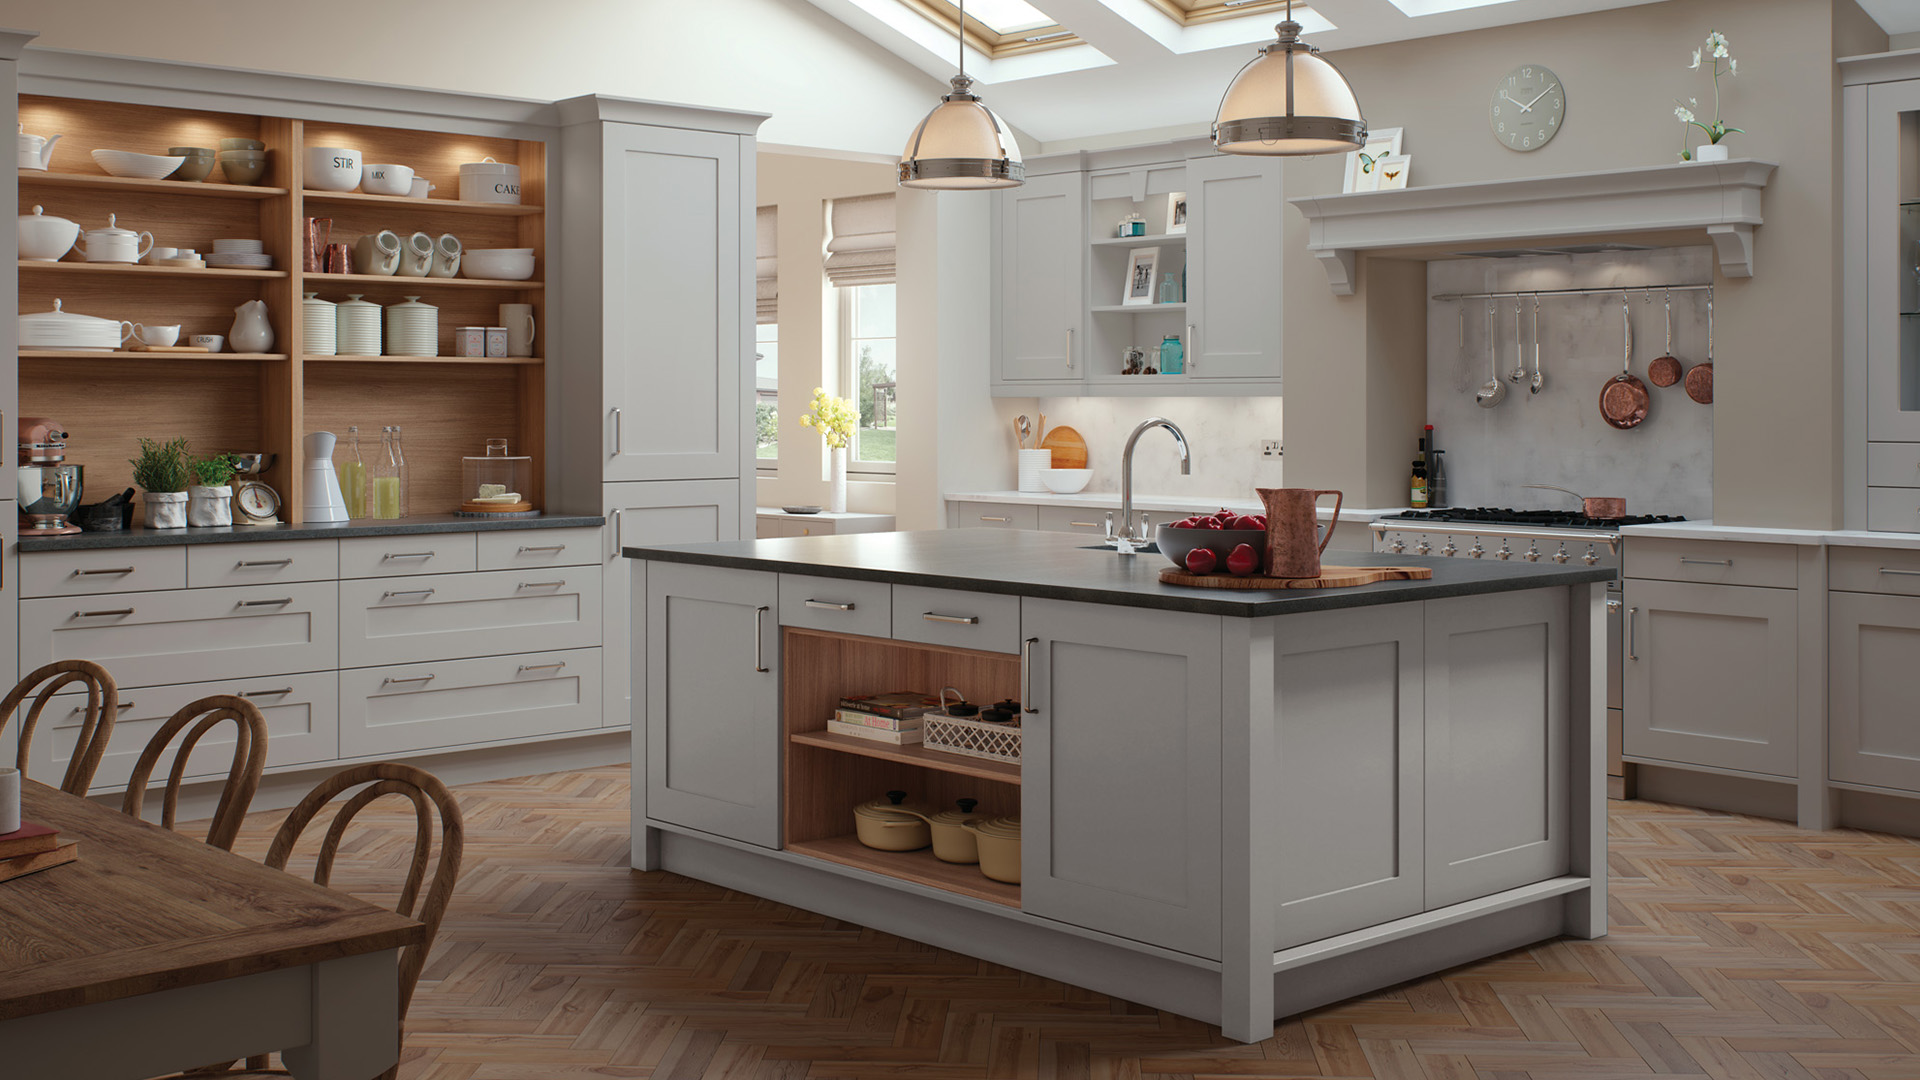 Georgia light grey smooth shaker kitchens offering a harmonious combination of classic lines and light grey serenity